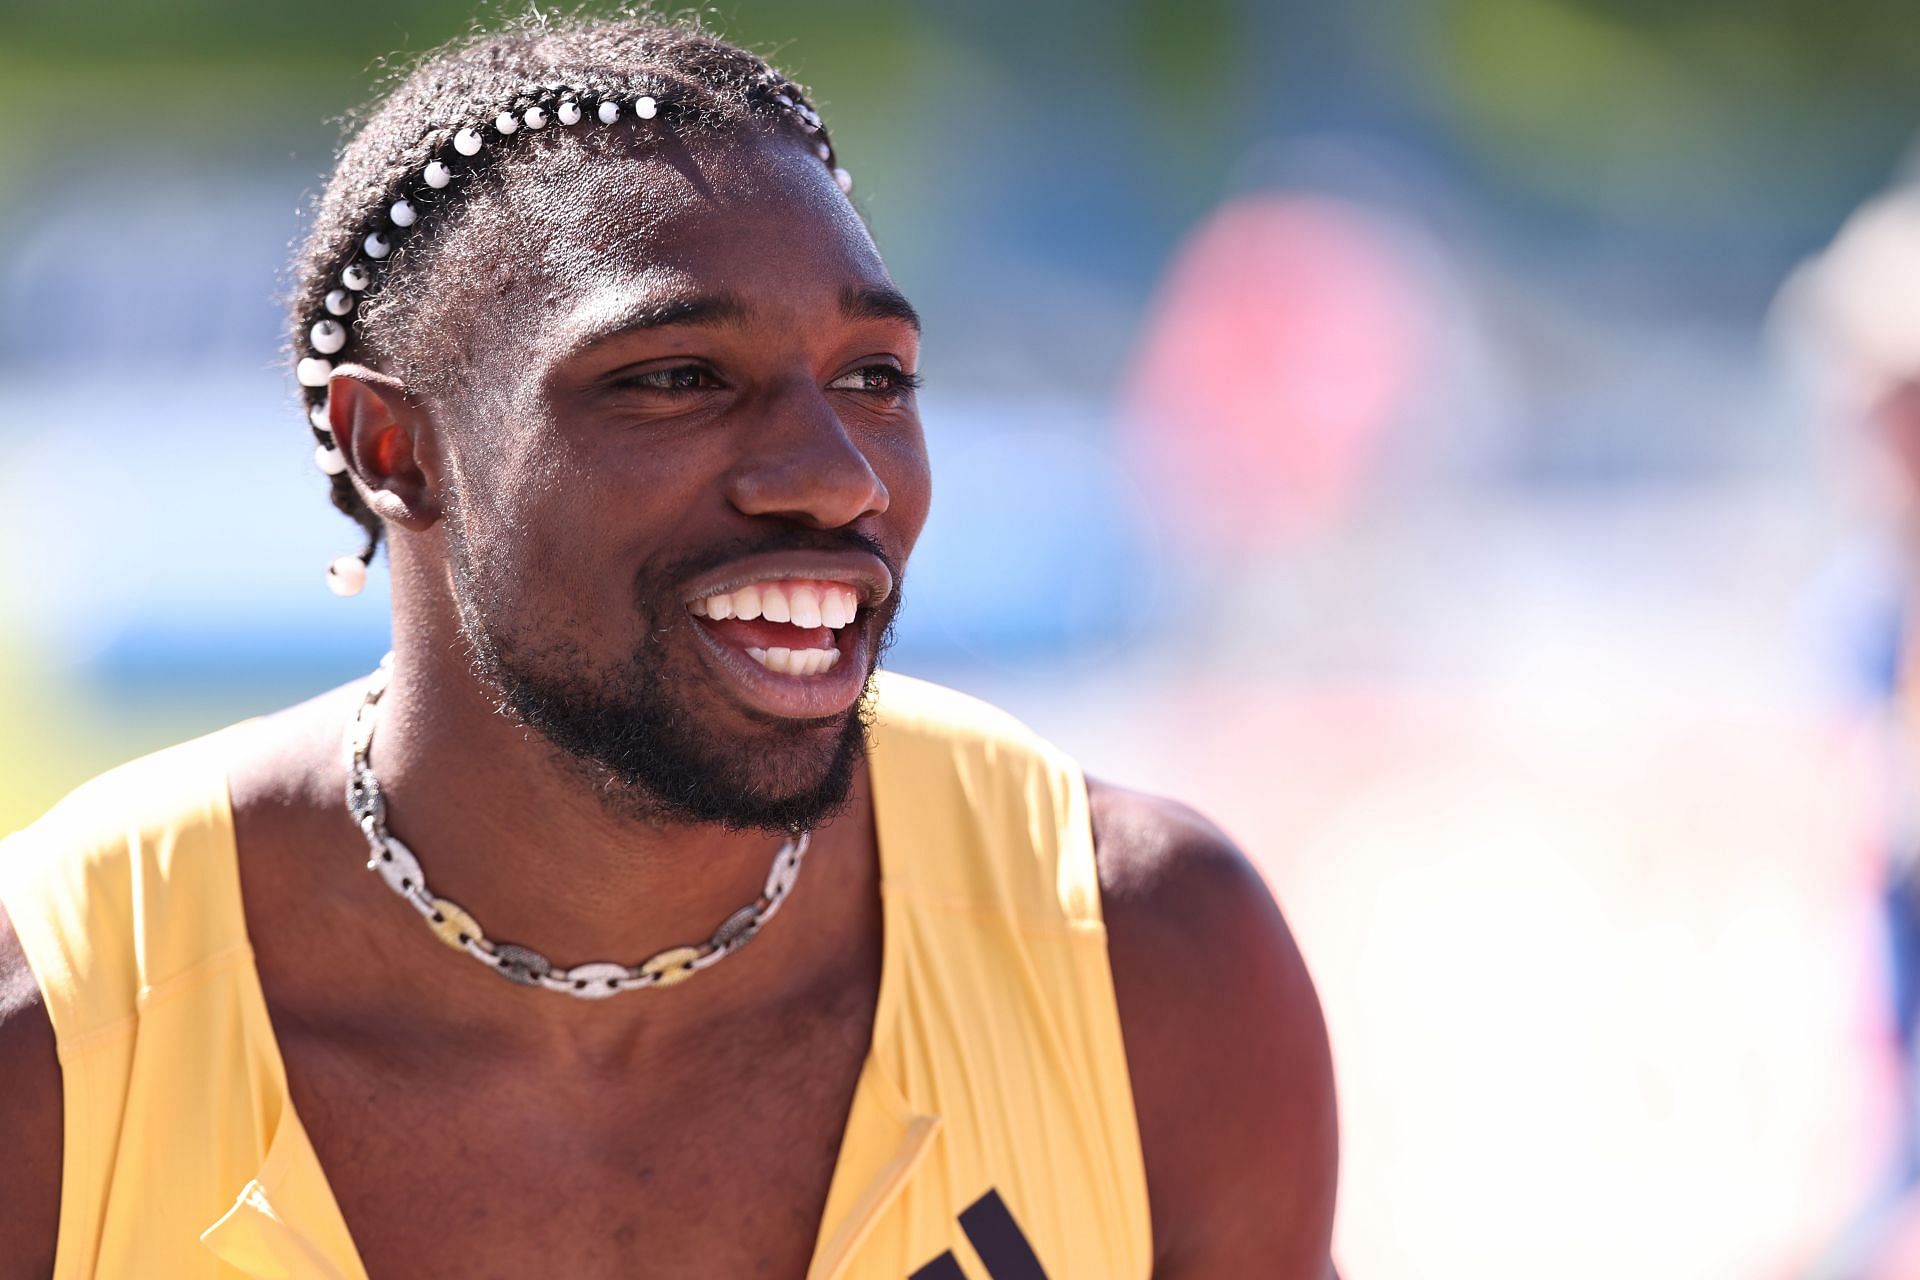 Noah Lyles will headline the 100m and 200m events at the 2024 U.S. Olympic Track and Field Trials.